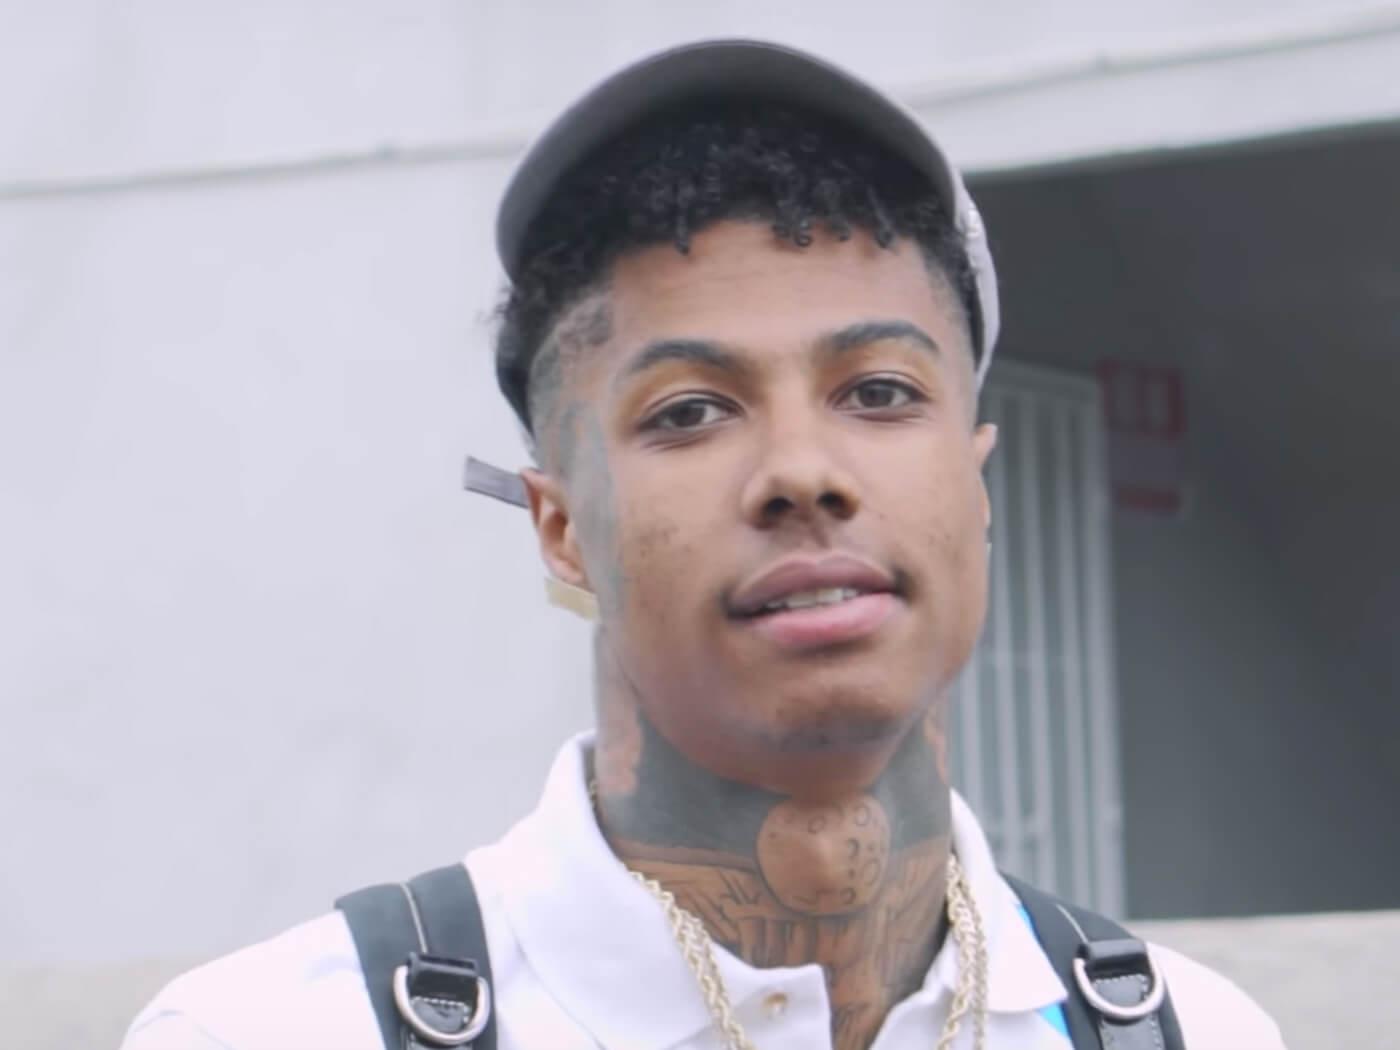 Blueface sends a missive from the “Studio”